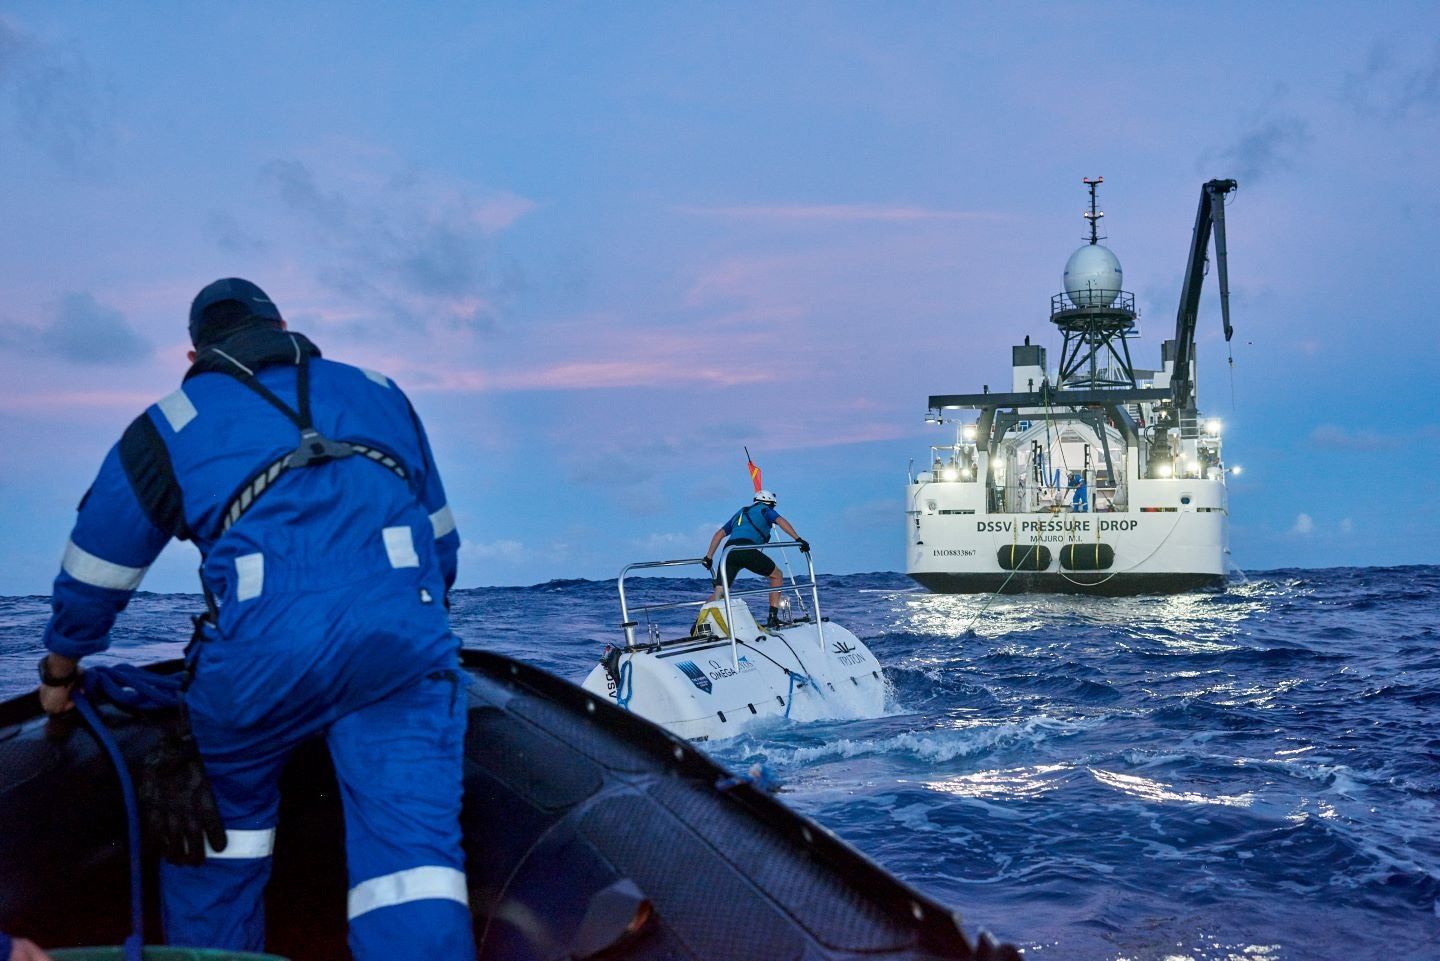 Vescovo descended nearly 36,000 feet into the Challenger Deep of the Mariana Trench